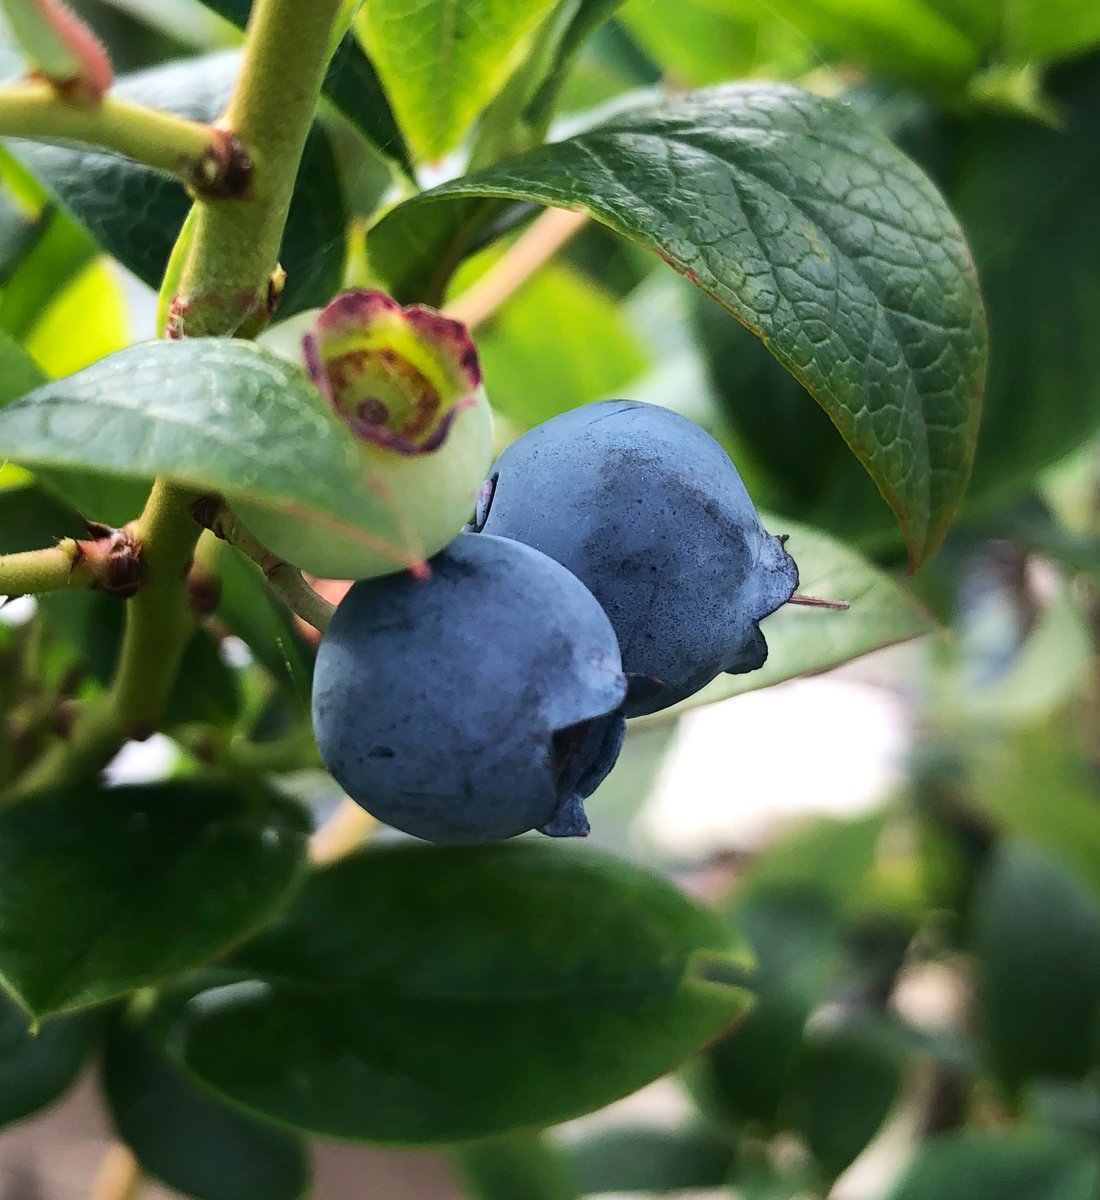 My first crop of blueberries- a 300% increase on last year’s crop! #gyo #allotmentlife